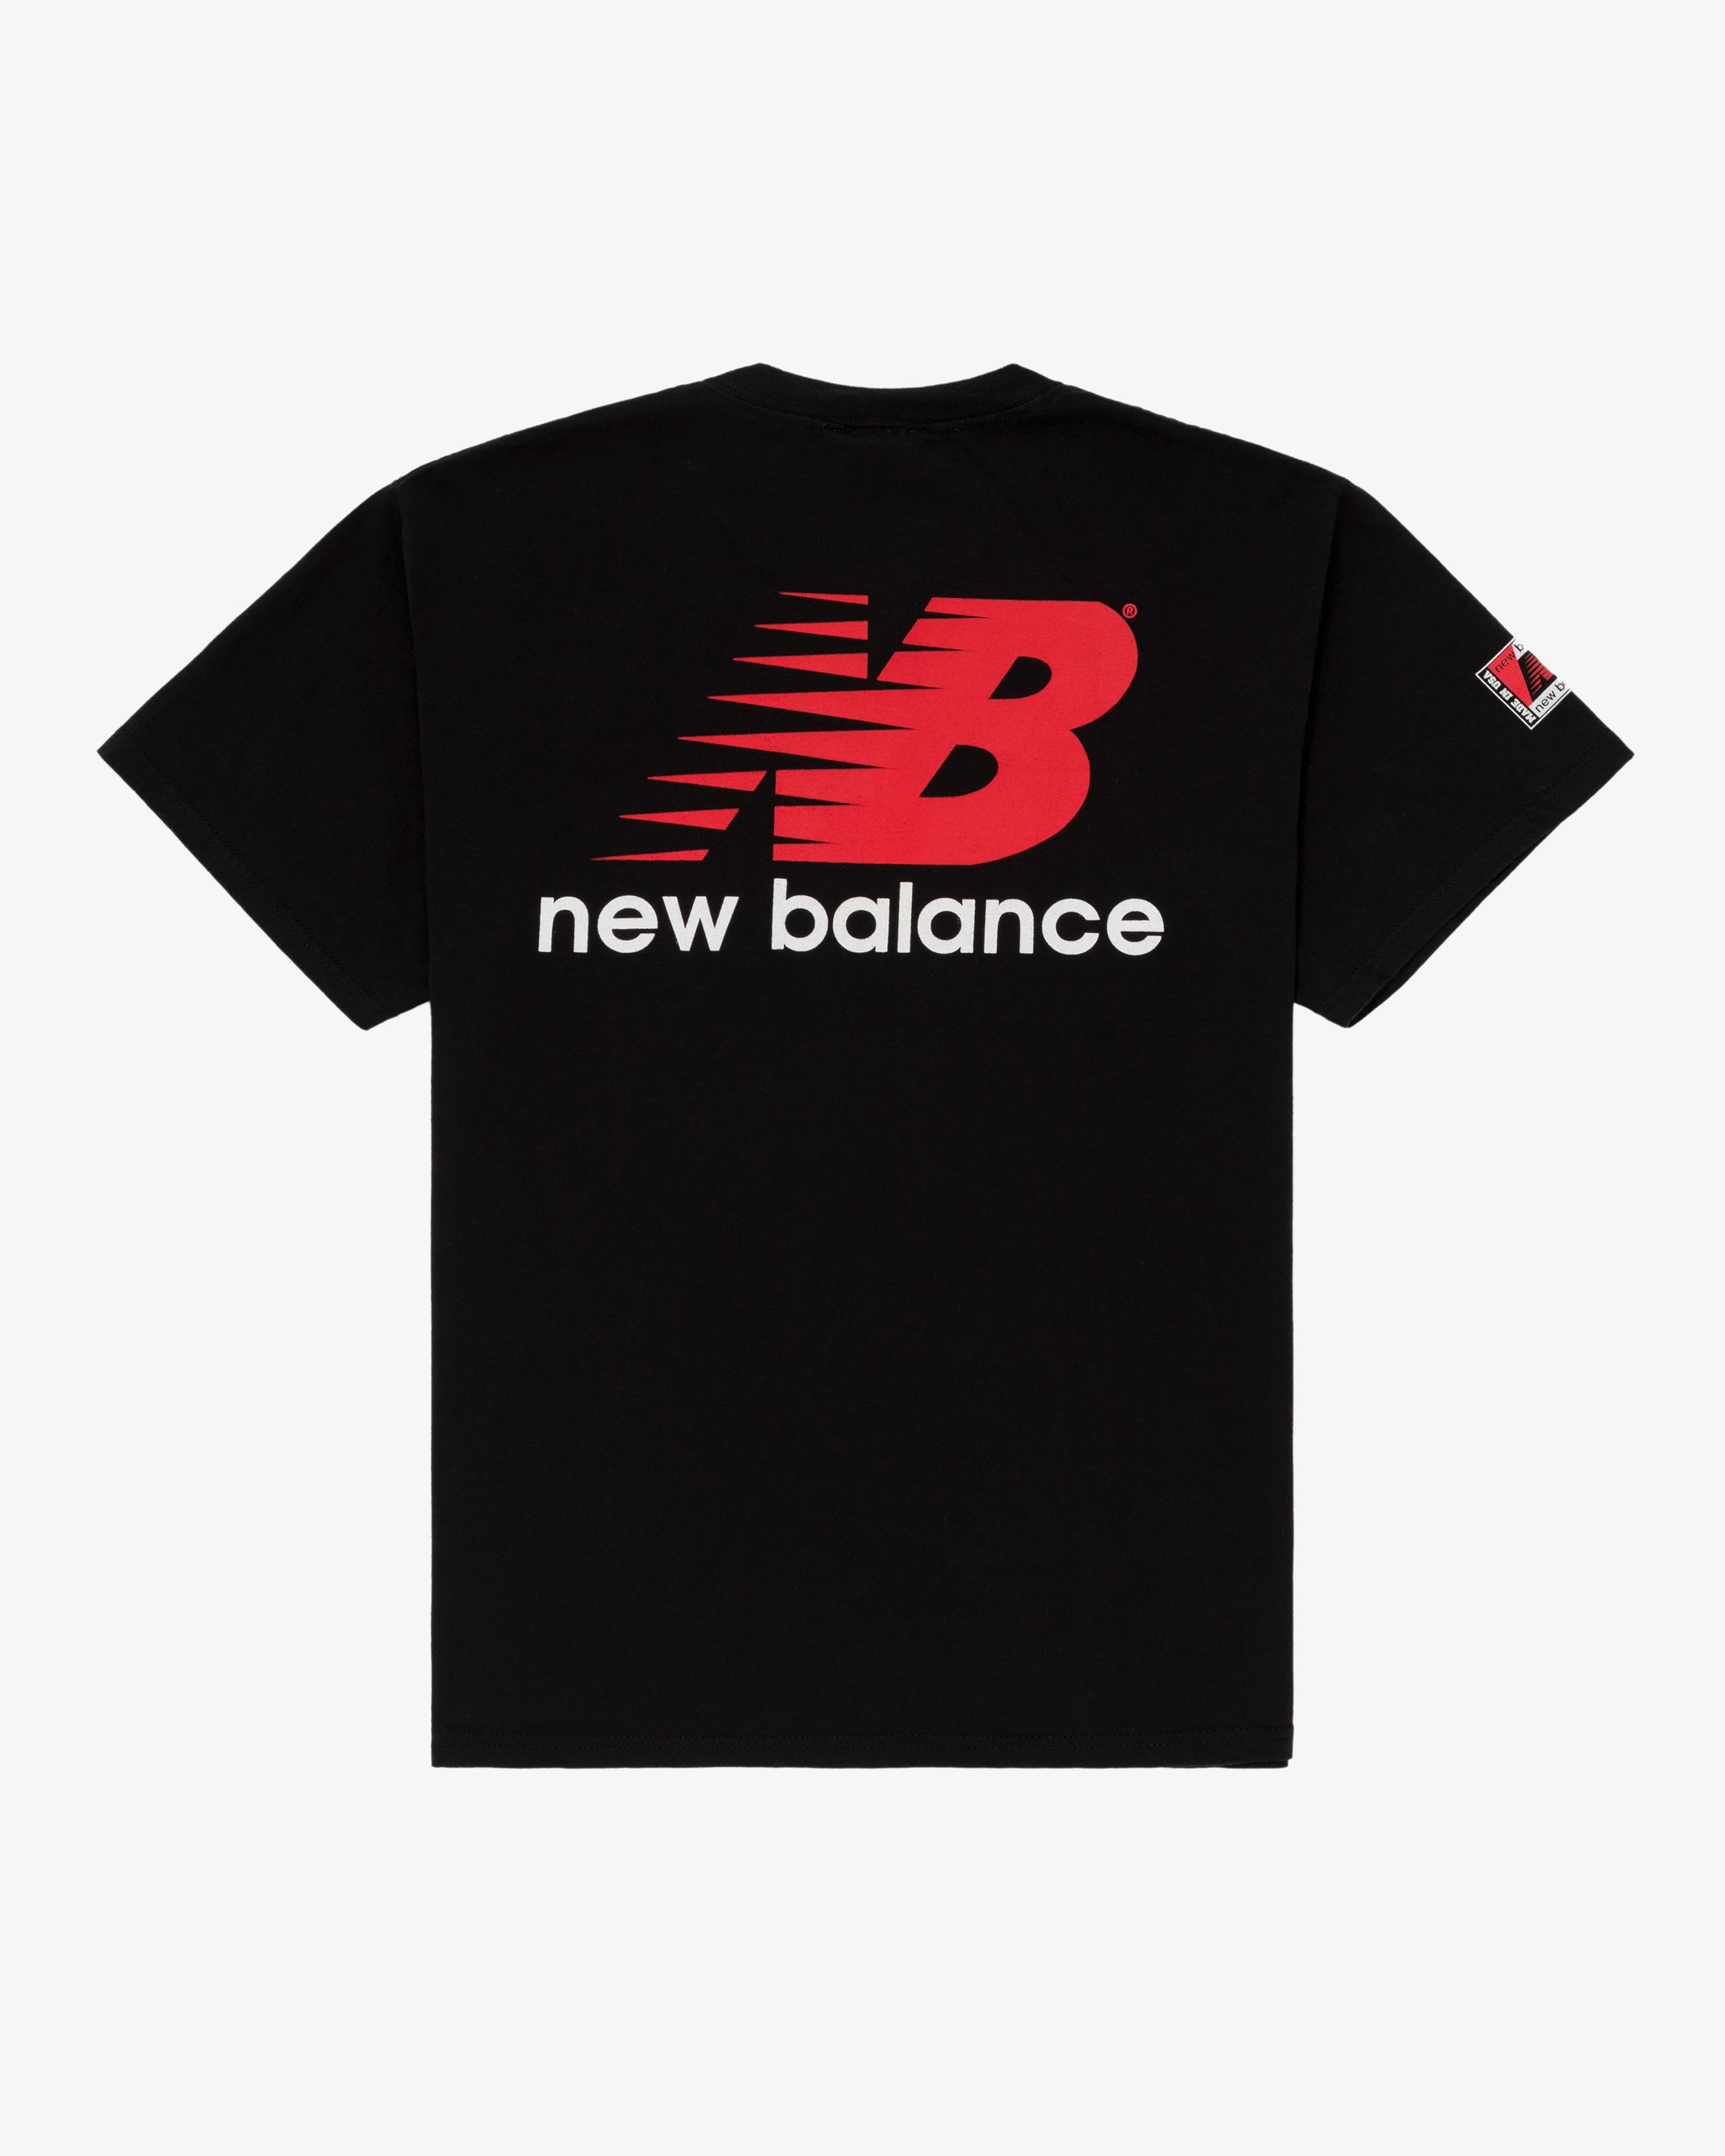 Vintage New Balance 'Endorsed By No One' Tee